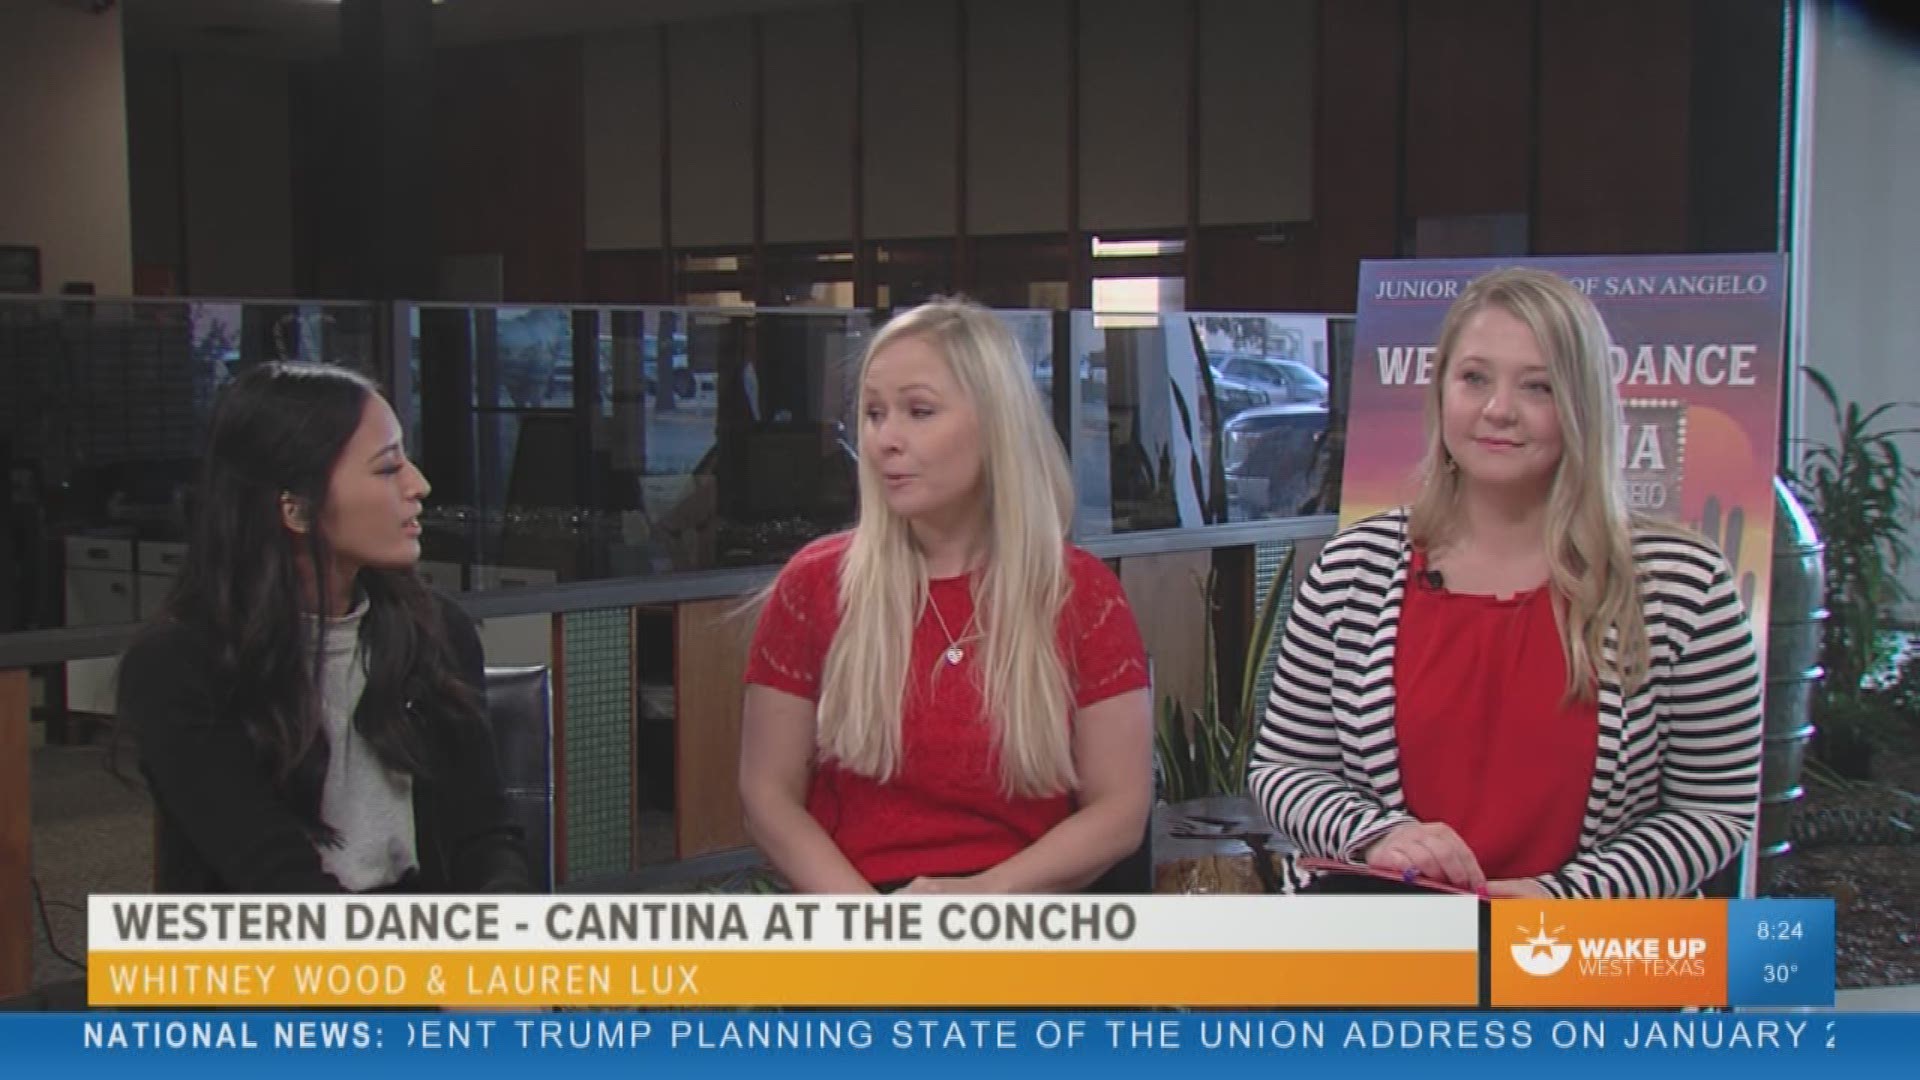 Whitney Wood and Lauren Lux give us the details for the Cantina at the Concho Western Dance fundraiser.